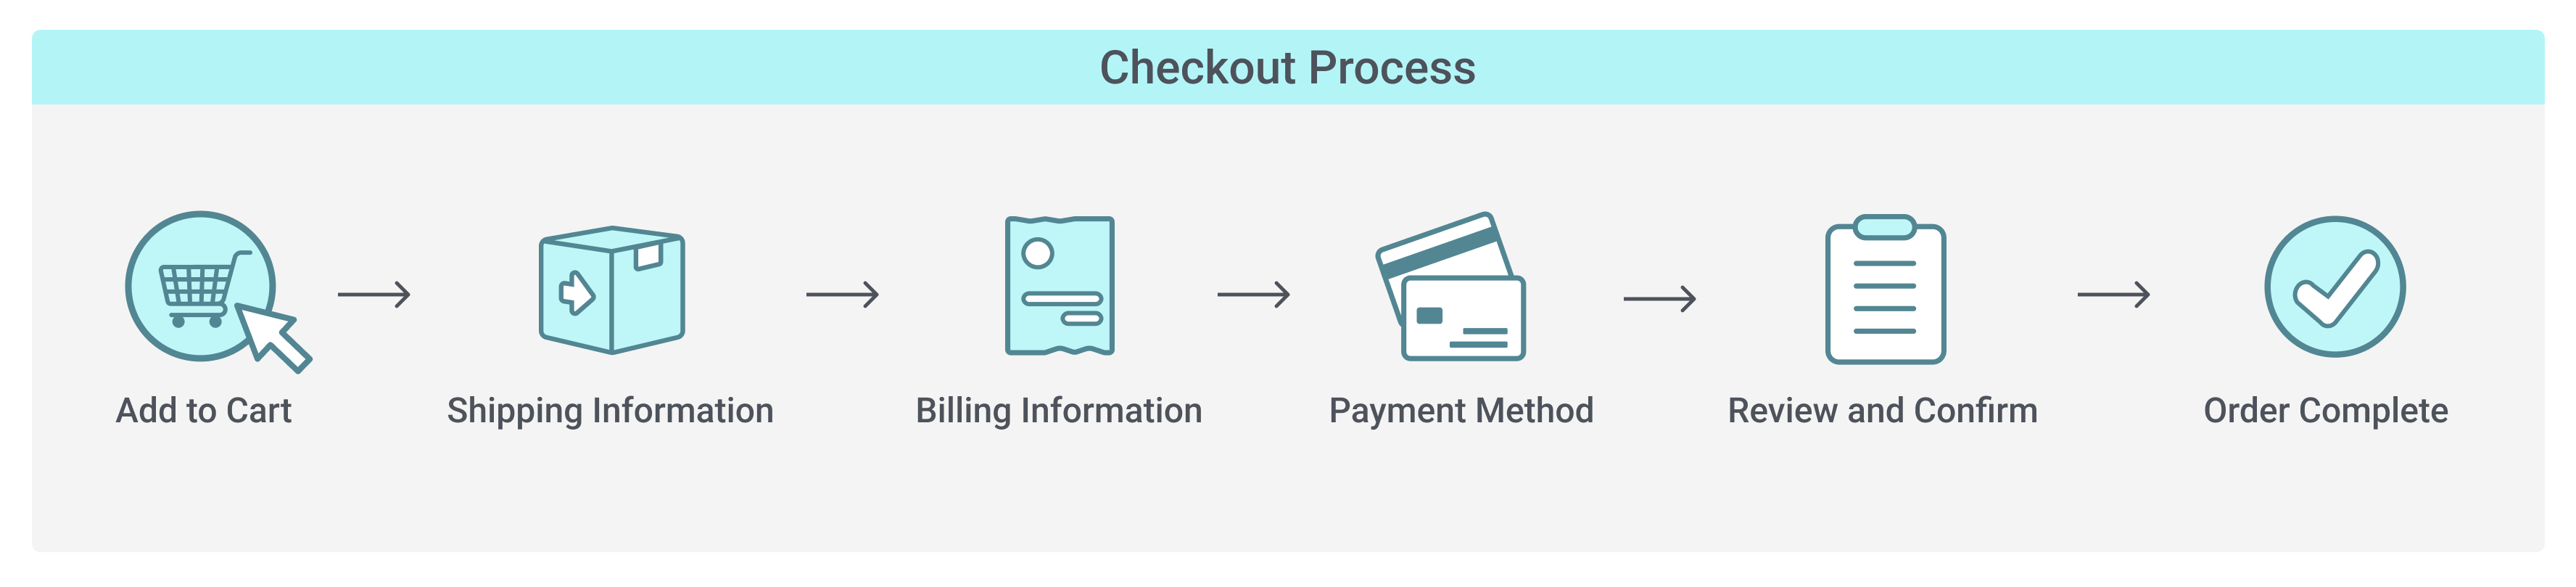 Implement a Seamless Checkout Process